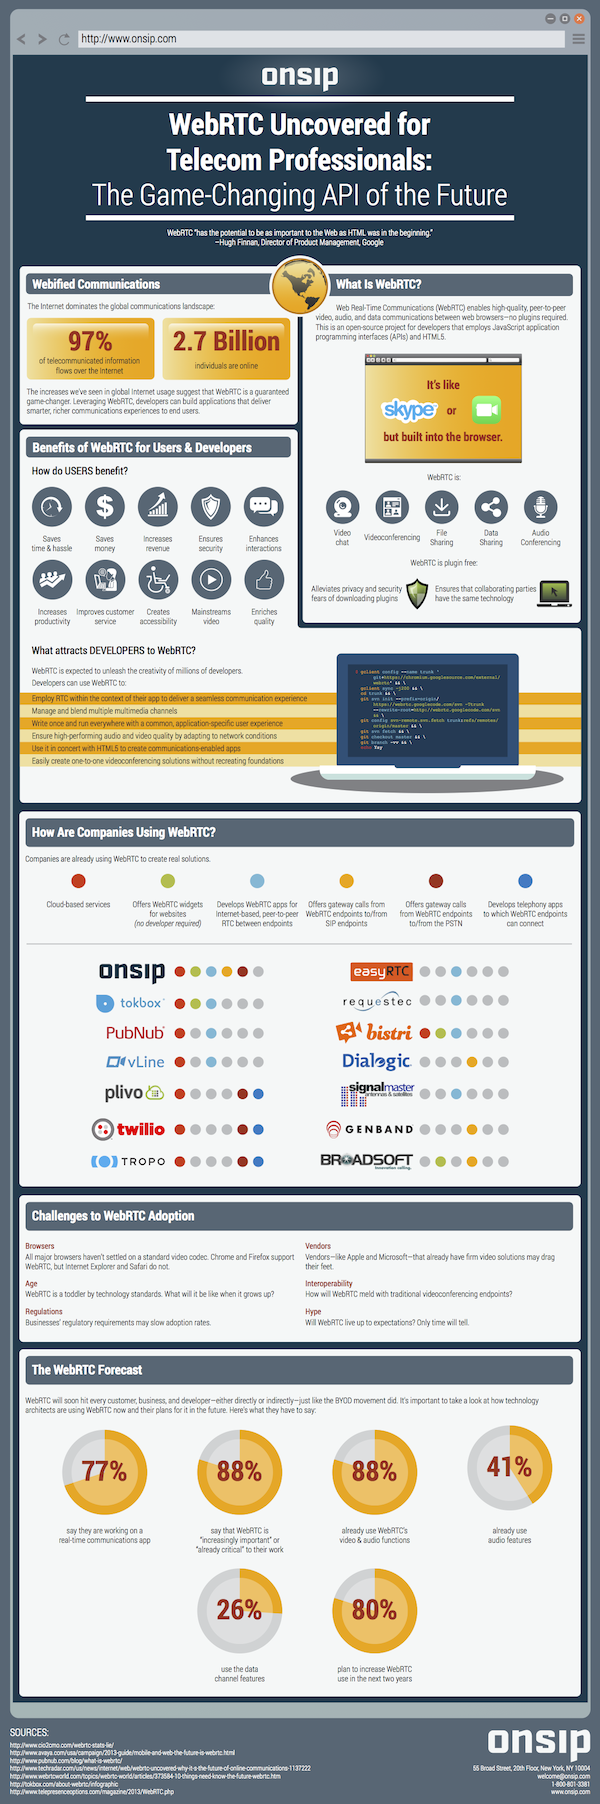 OnSIP Infographic: WebRTC Uncovered for Telecom Professionals